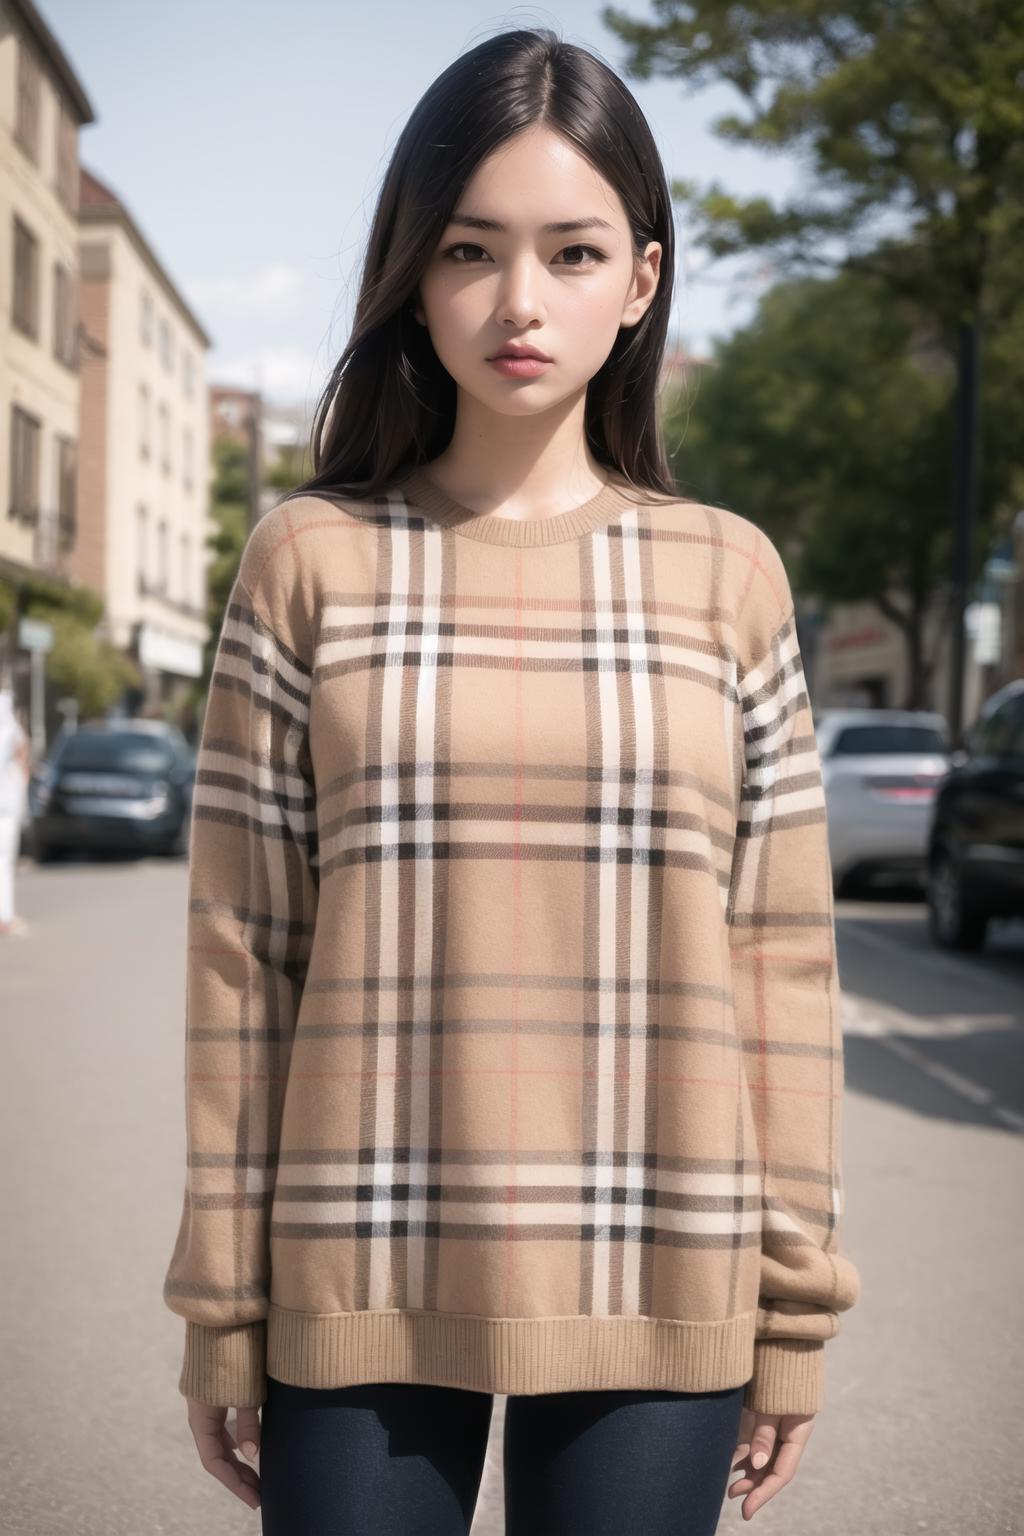 Burberry plaid pattern image by psoft